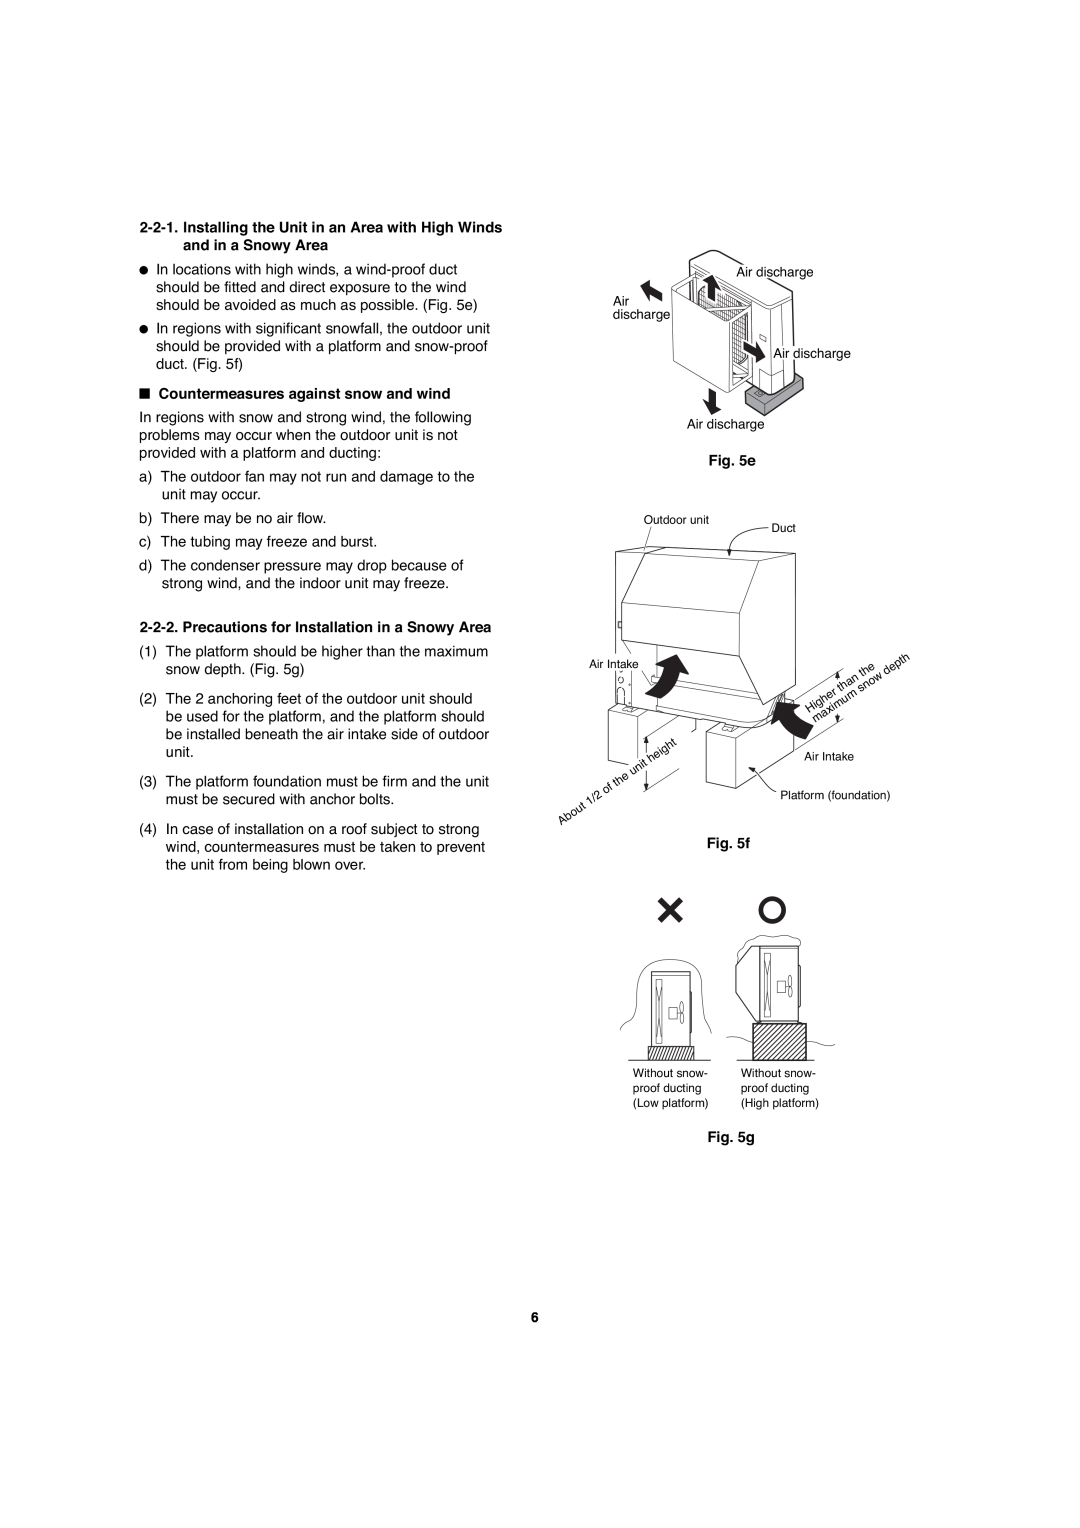 Sanyo C3082, C3682 service manual Countermeasures against snow and wind, Precautions for Installation in a Snowy Area 